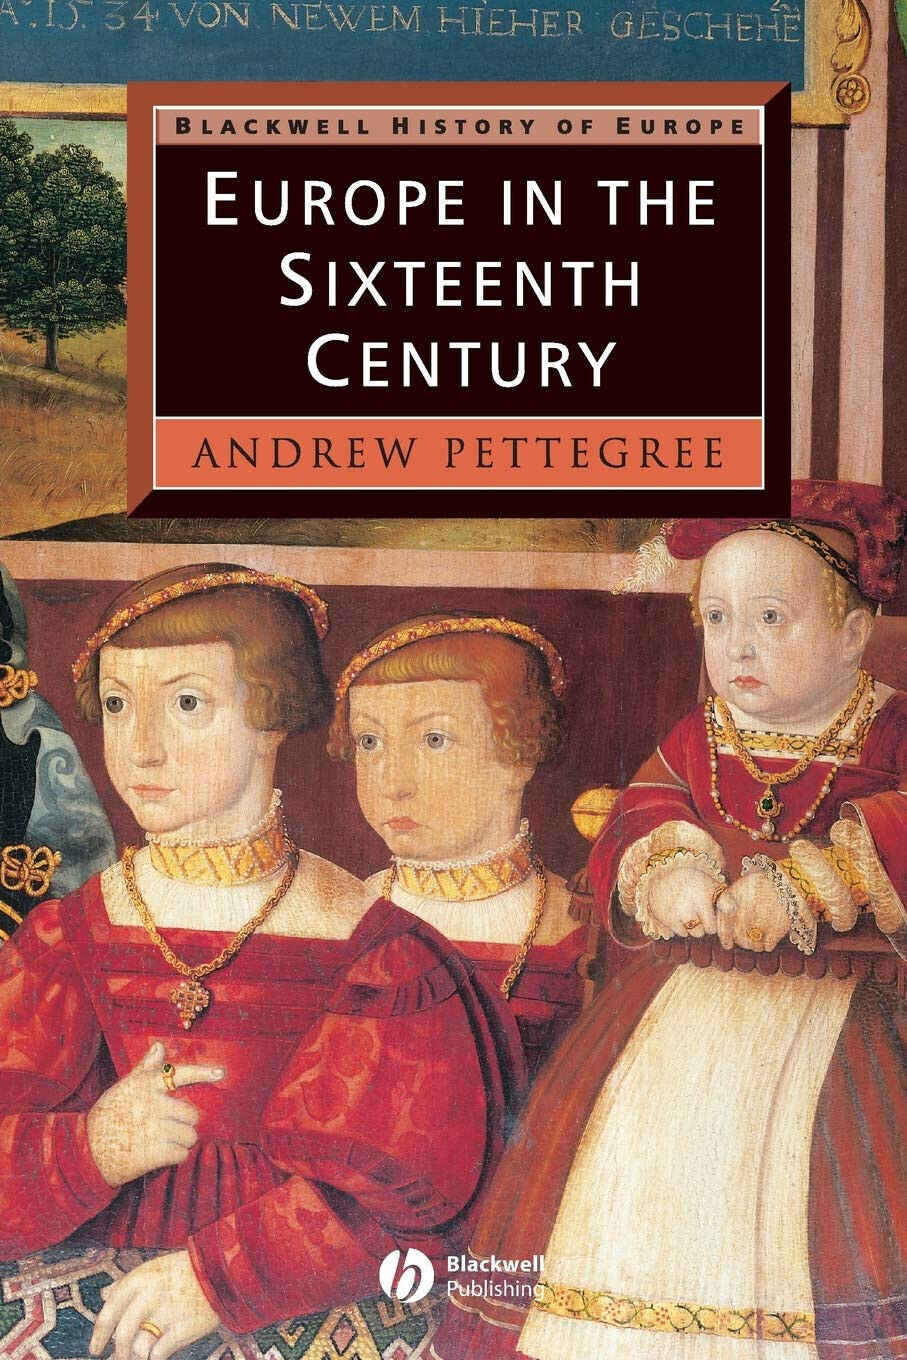 Europe in the Sixteenth Centur - Pettegree - John Wiley & Sons, 2011